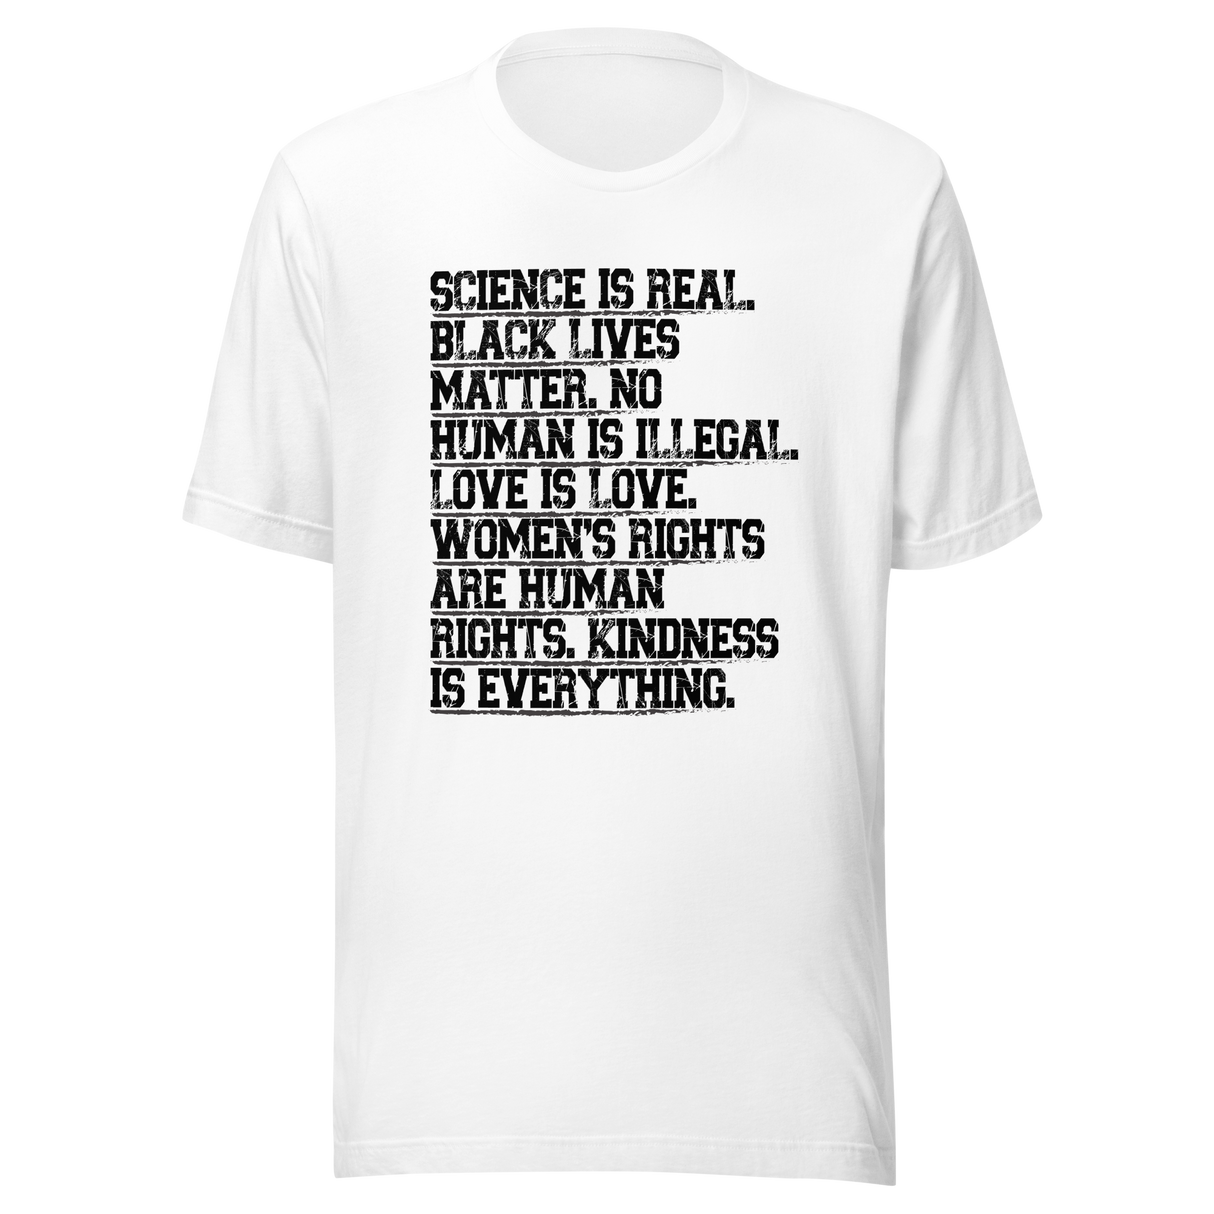 science-is-real-black-lives-matter-no-human-is-illegal-science-tee-real-t-shirt-blm-tee-t-shirt-tee#color_white